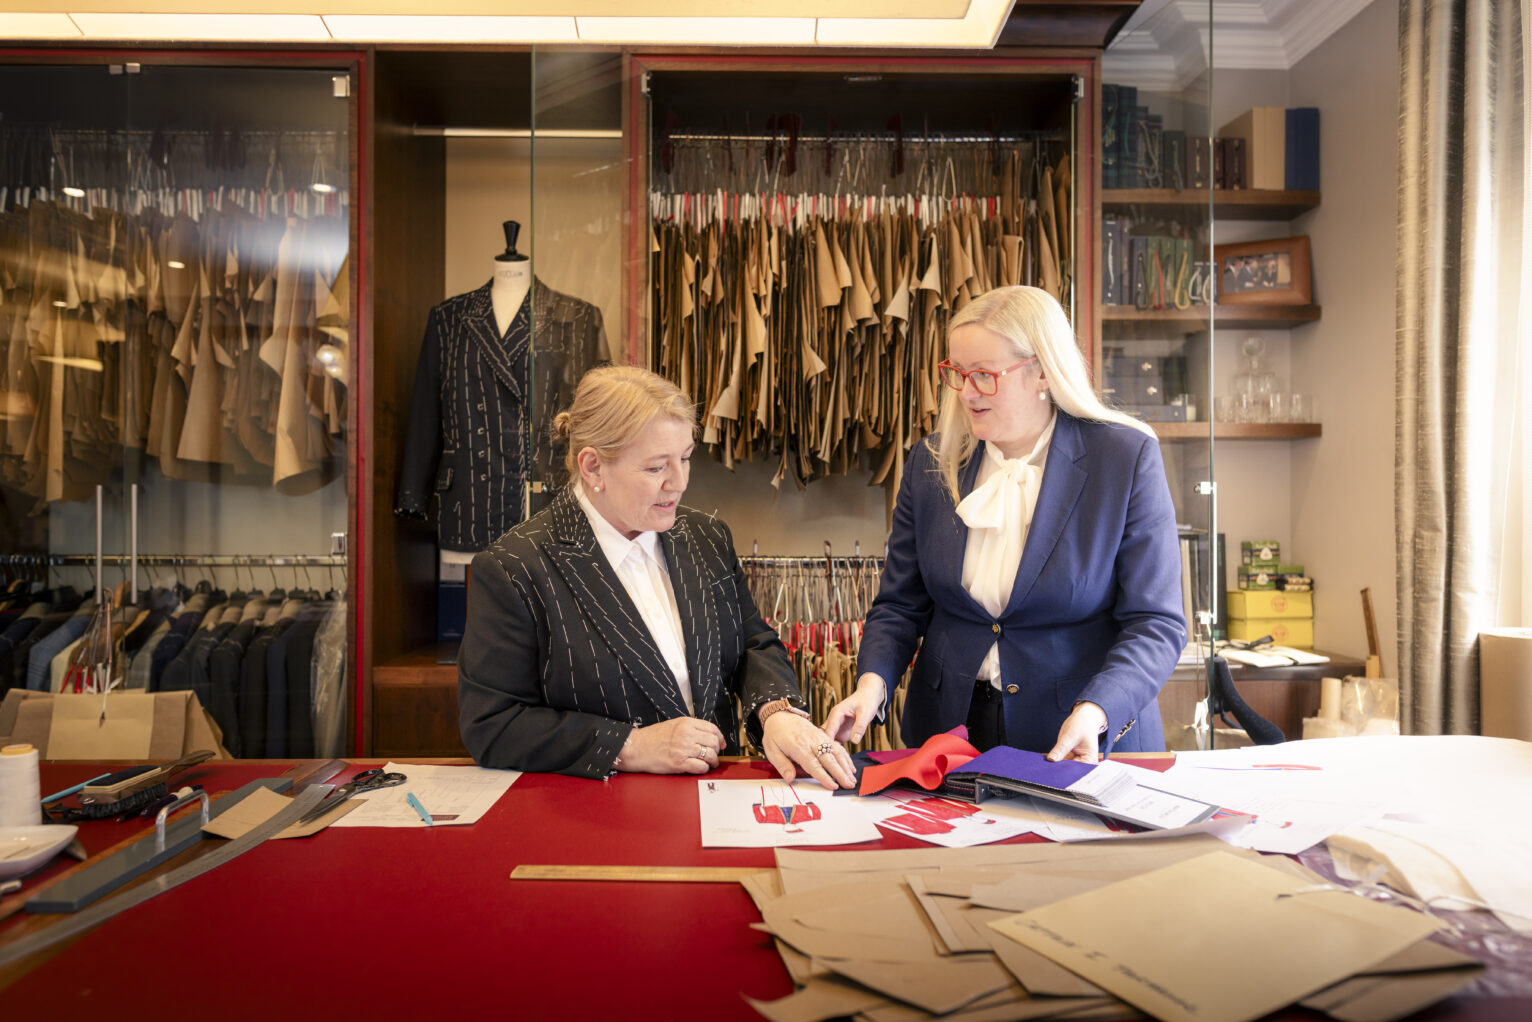 Captain Inger Thorhauge receives a final fitting for her new uniform at Kathryn Sargent’s Atelier in Mayfair. Kathryn is the first and only female Savile Row Master Tailor. 
